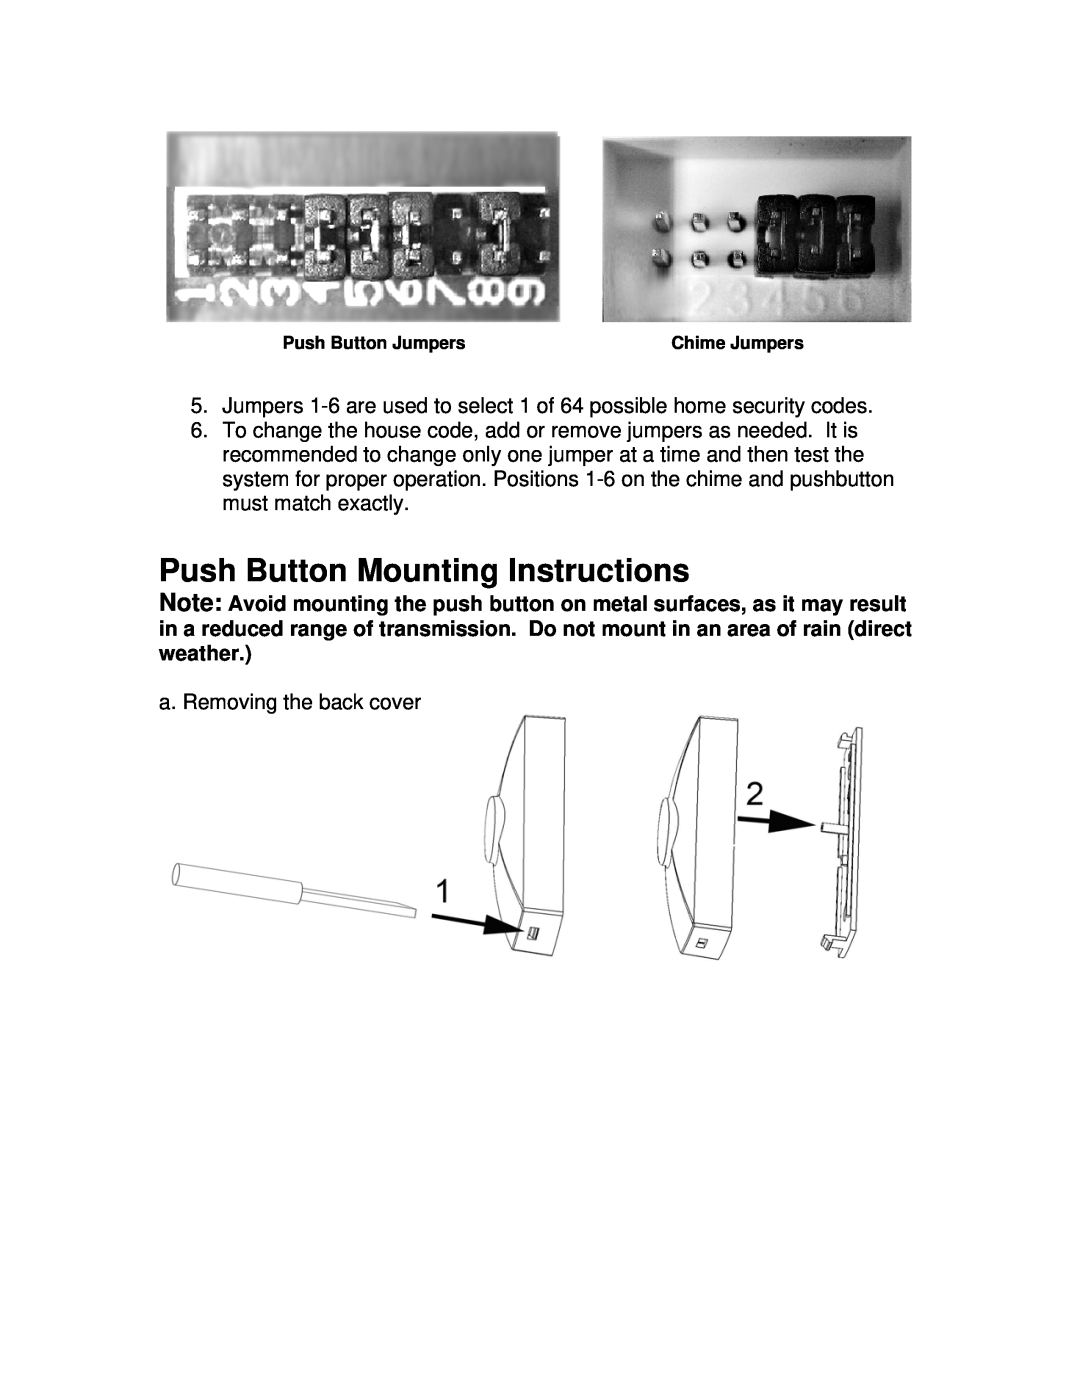 Jasco GE 19209 installation instructions Push Button Mounting Instructions 